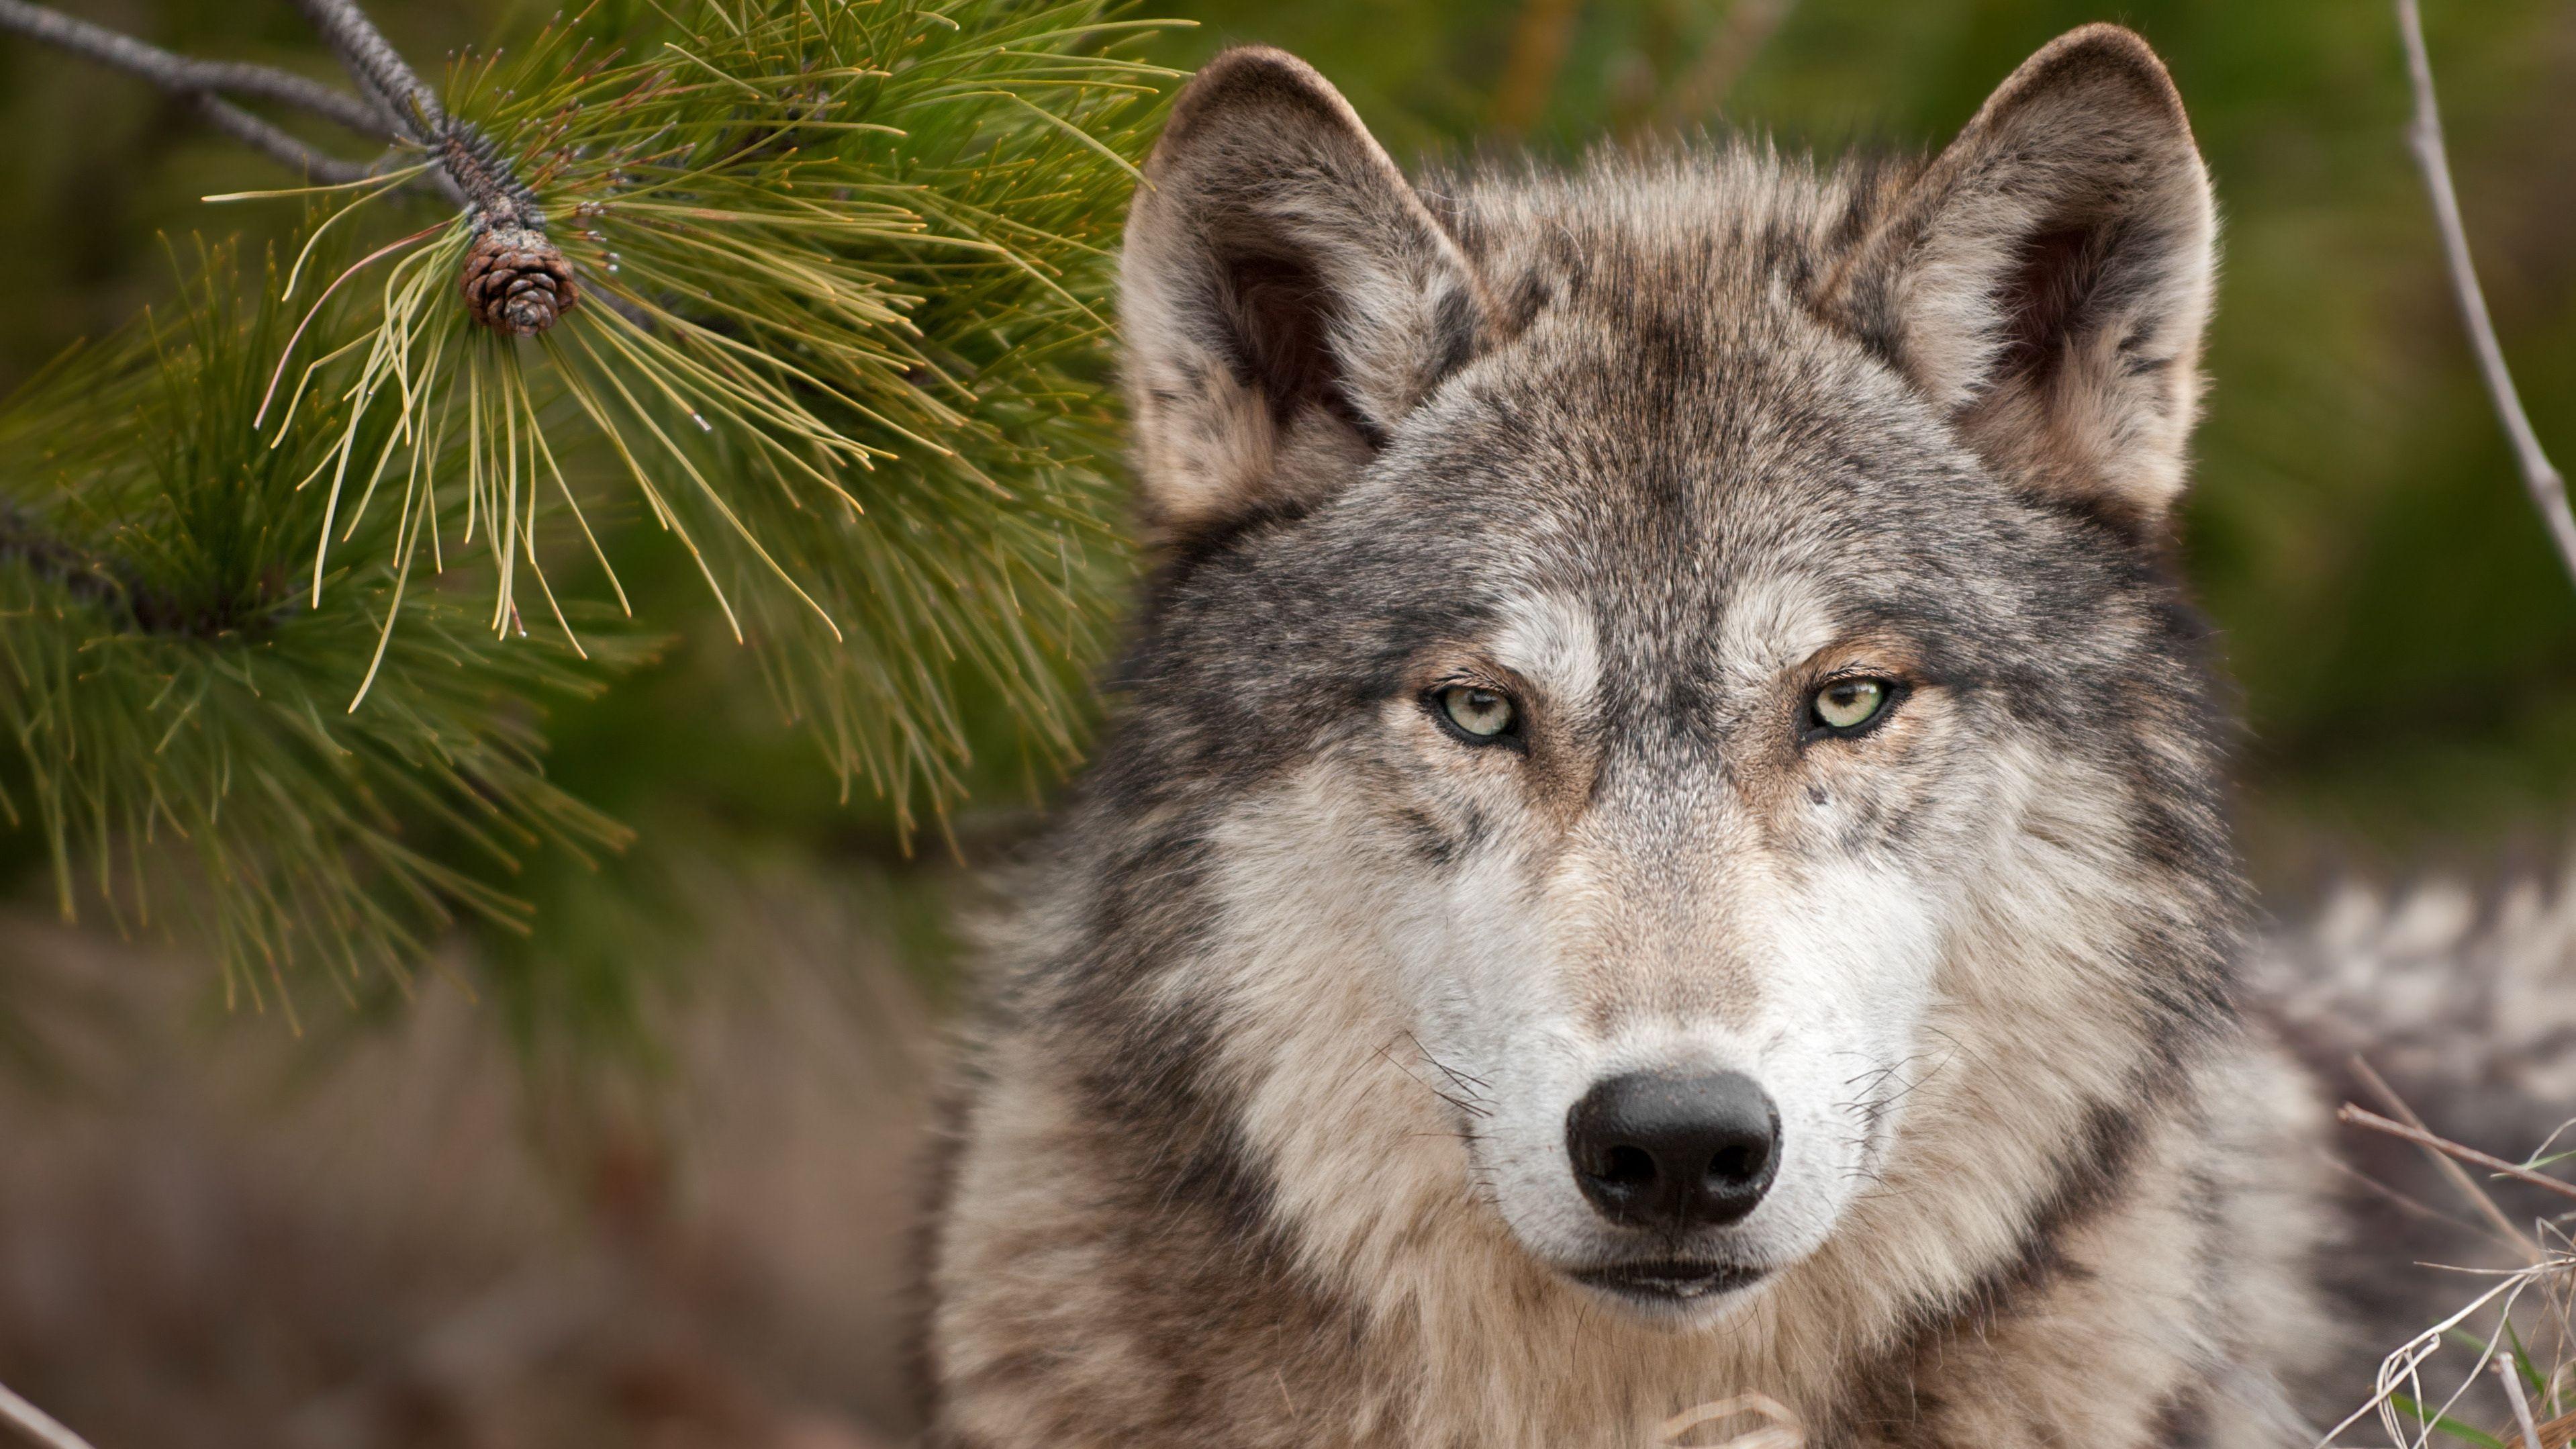 Wolf Image High Definition Wallpaper Free Download